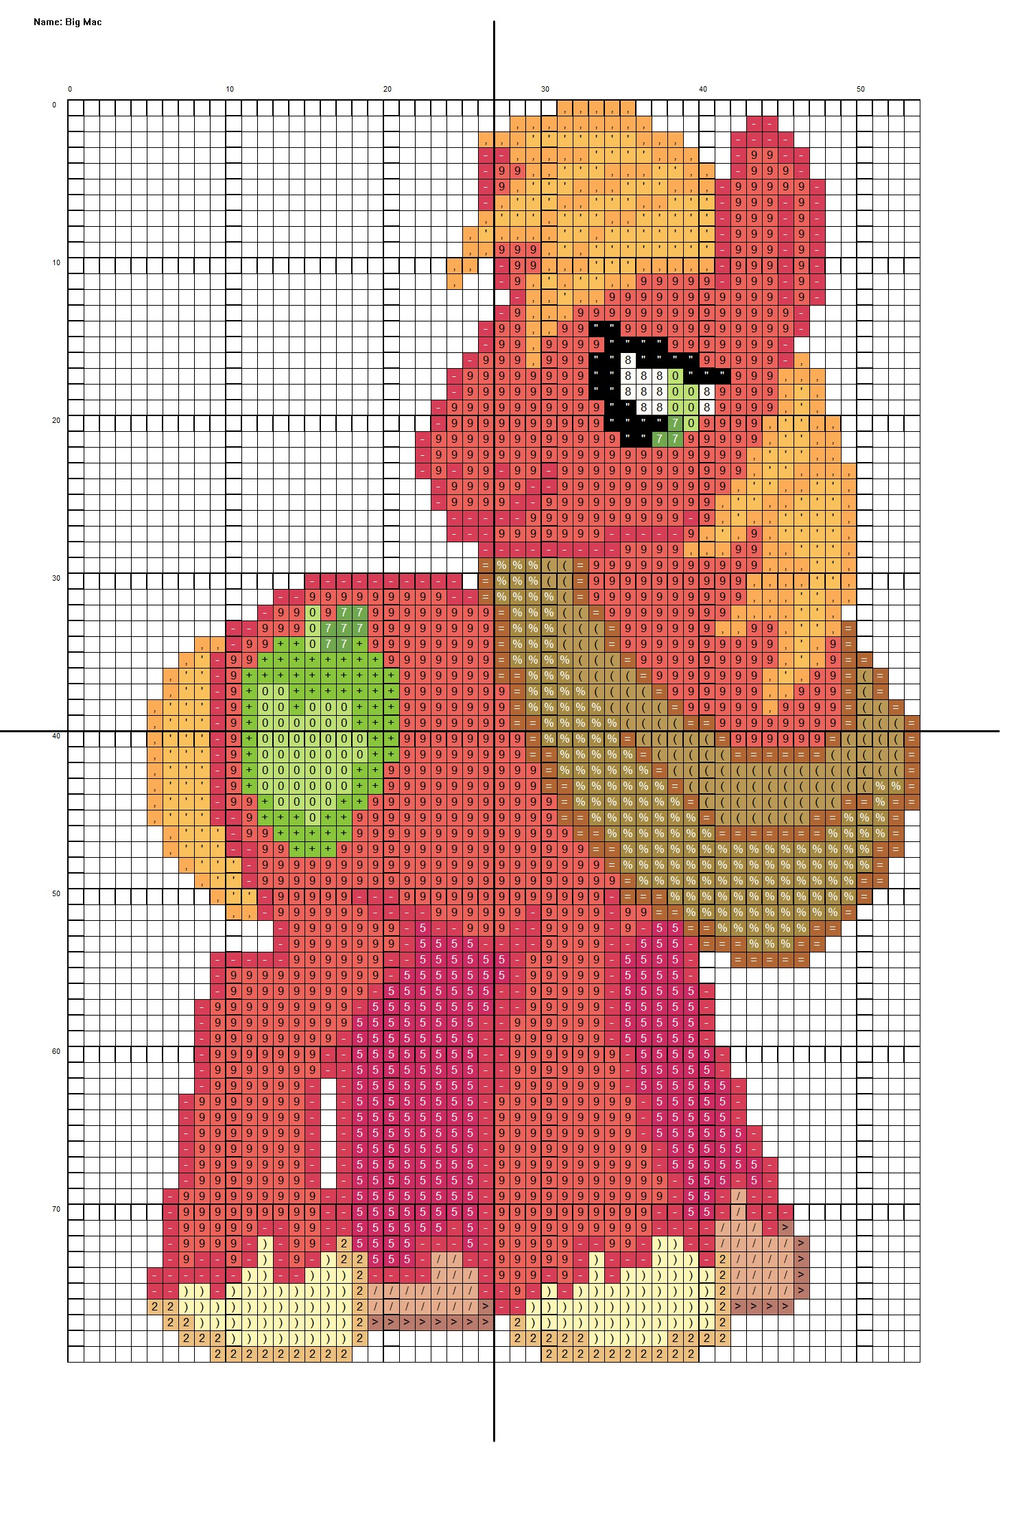 Cross Stitch Ponies favourites by Rellsher on DeviantArt